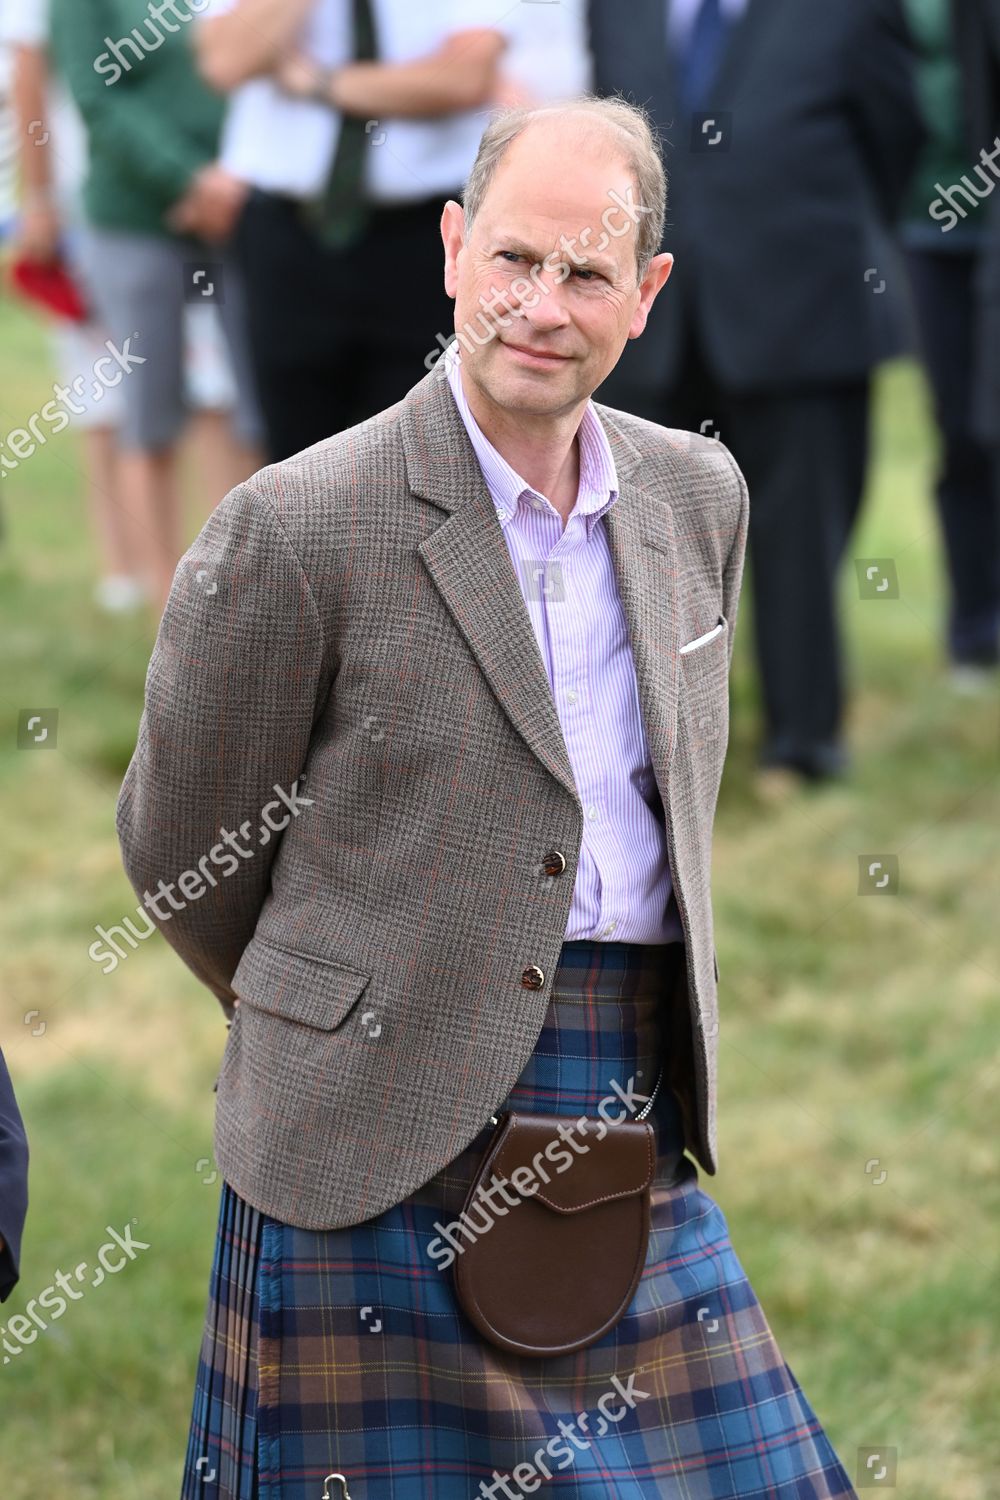 prince-edward-and-sophie-countess-of-wessex-visit-to-forfar-golf-club-scotland-uk-shutterstock-editorial-12172307i.jpg